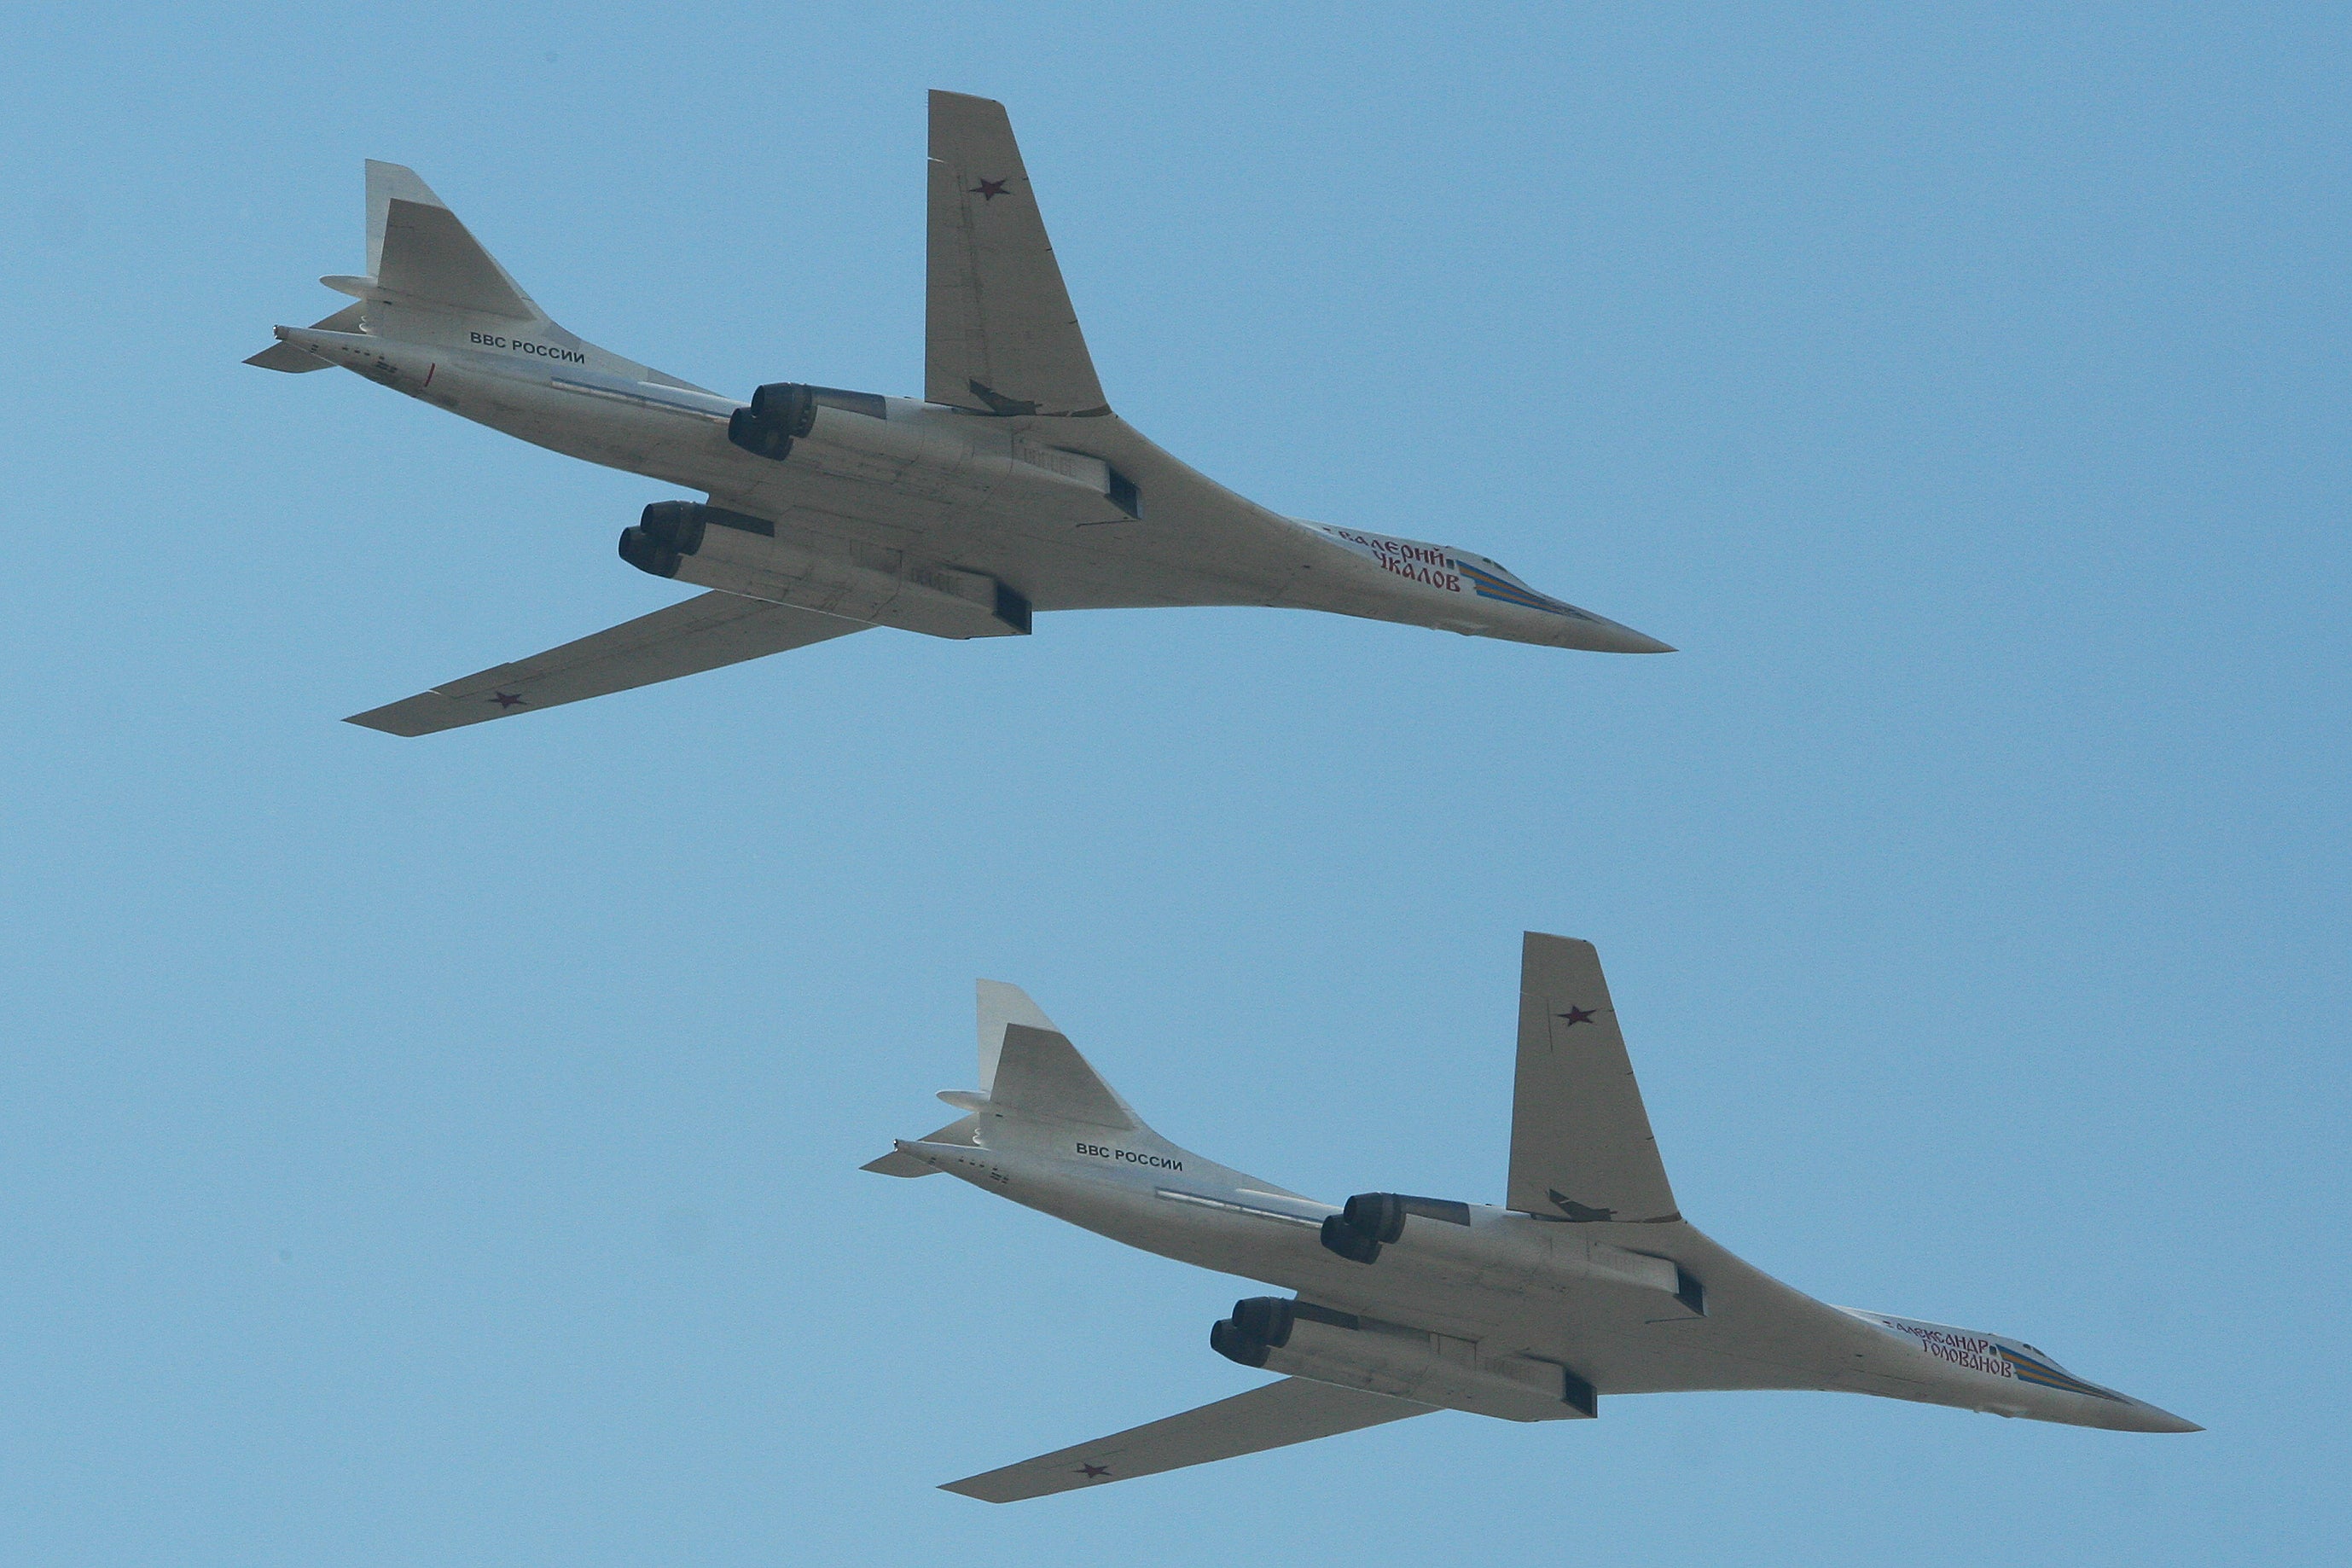 Two Russian 'Blackjack' aircraft similar to those intercepted